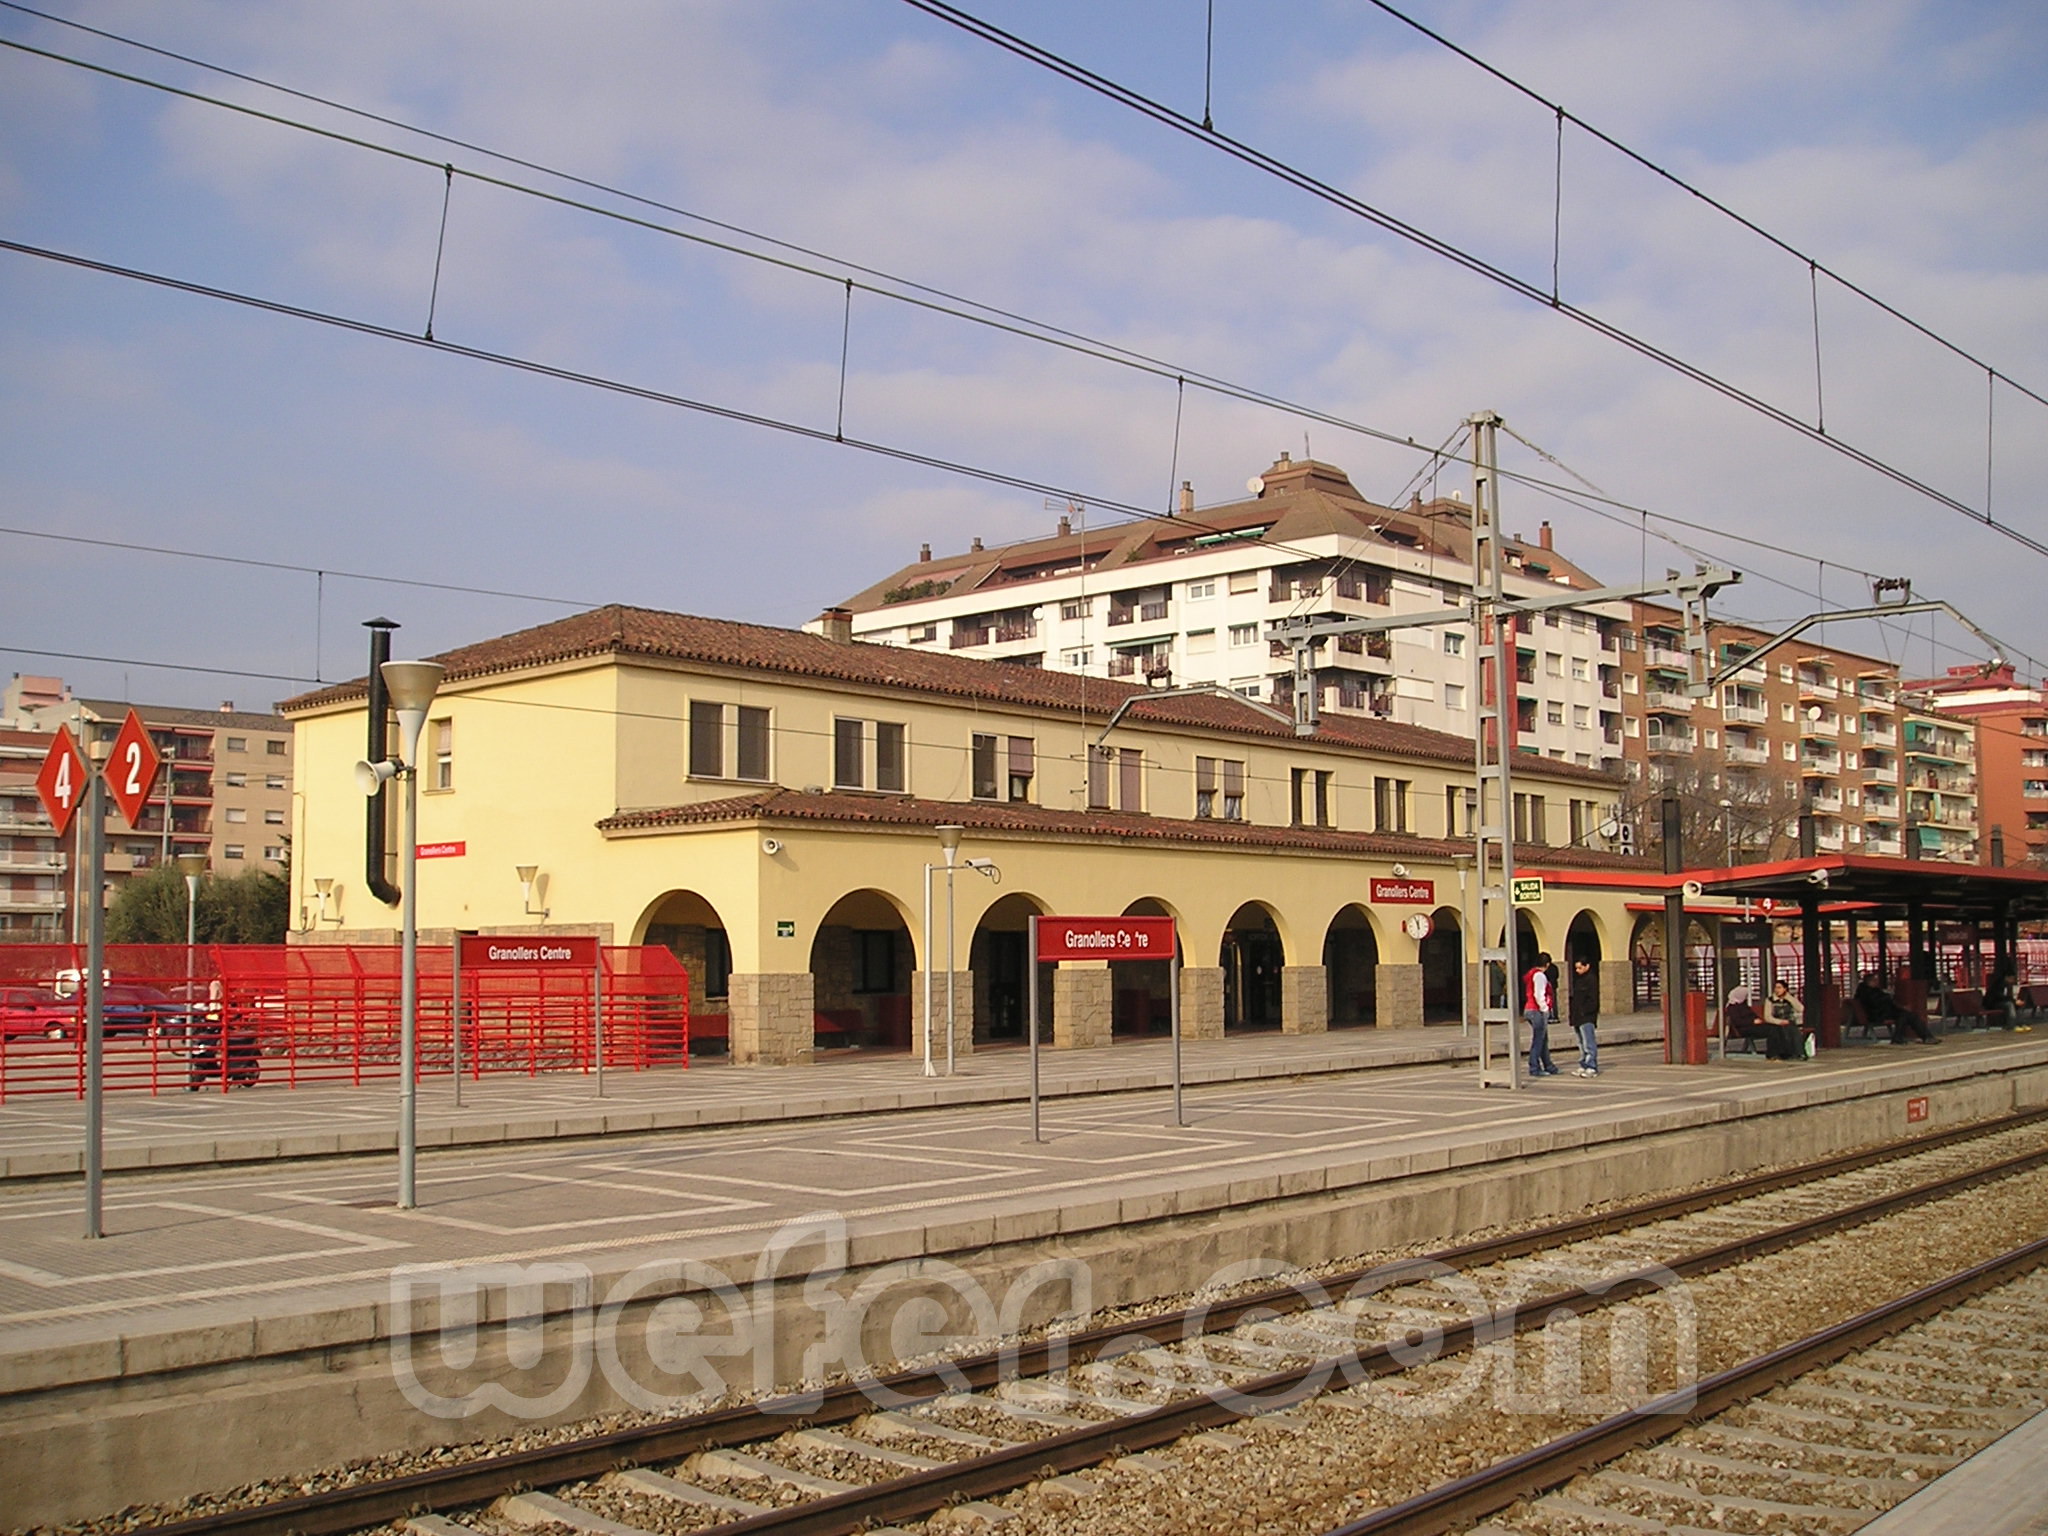 Renfe / ADIF: Granollers - Centre